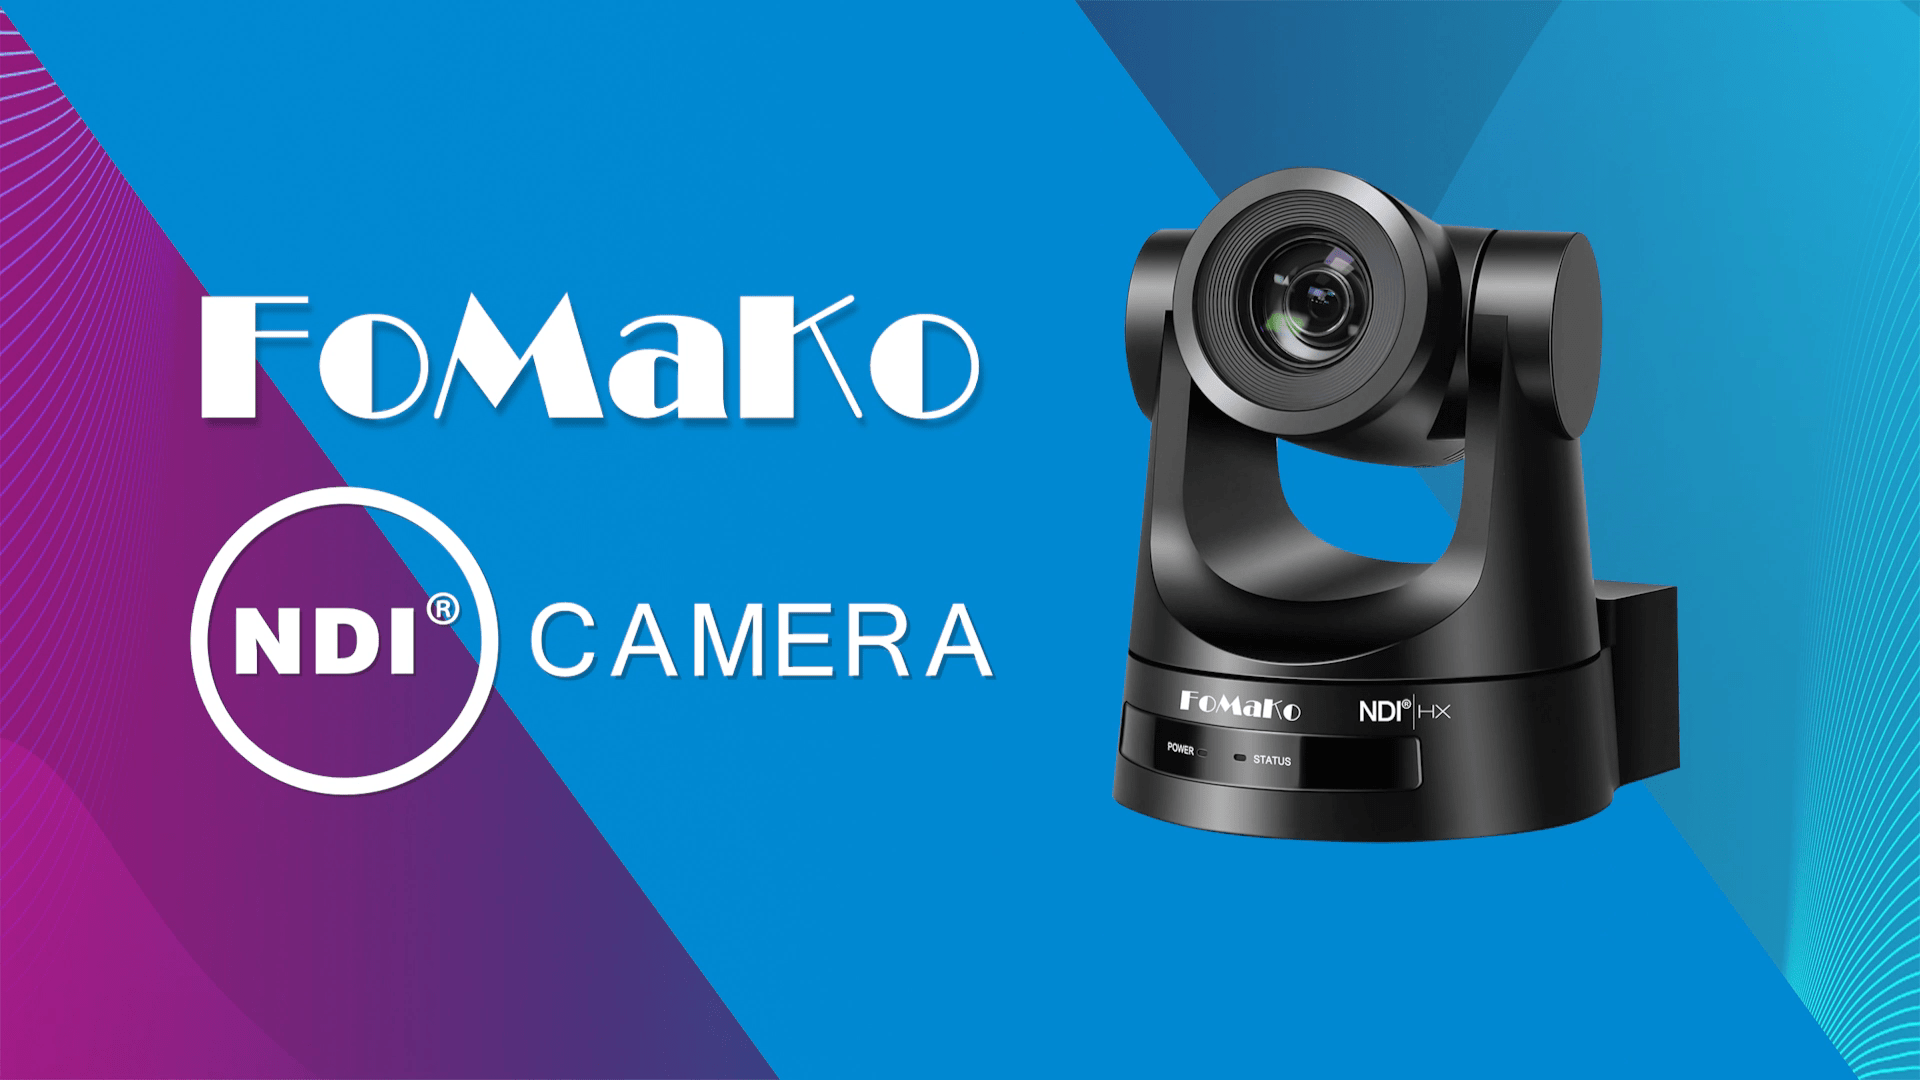 FoMaKo Review: Latest Conference Camera 1080p Live Streaming